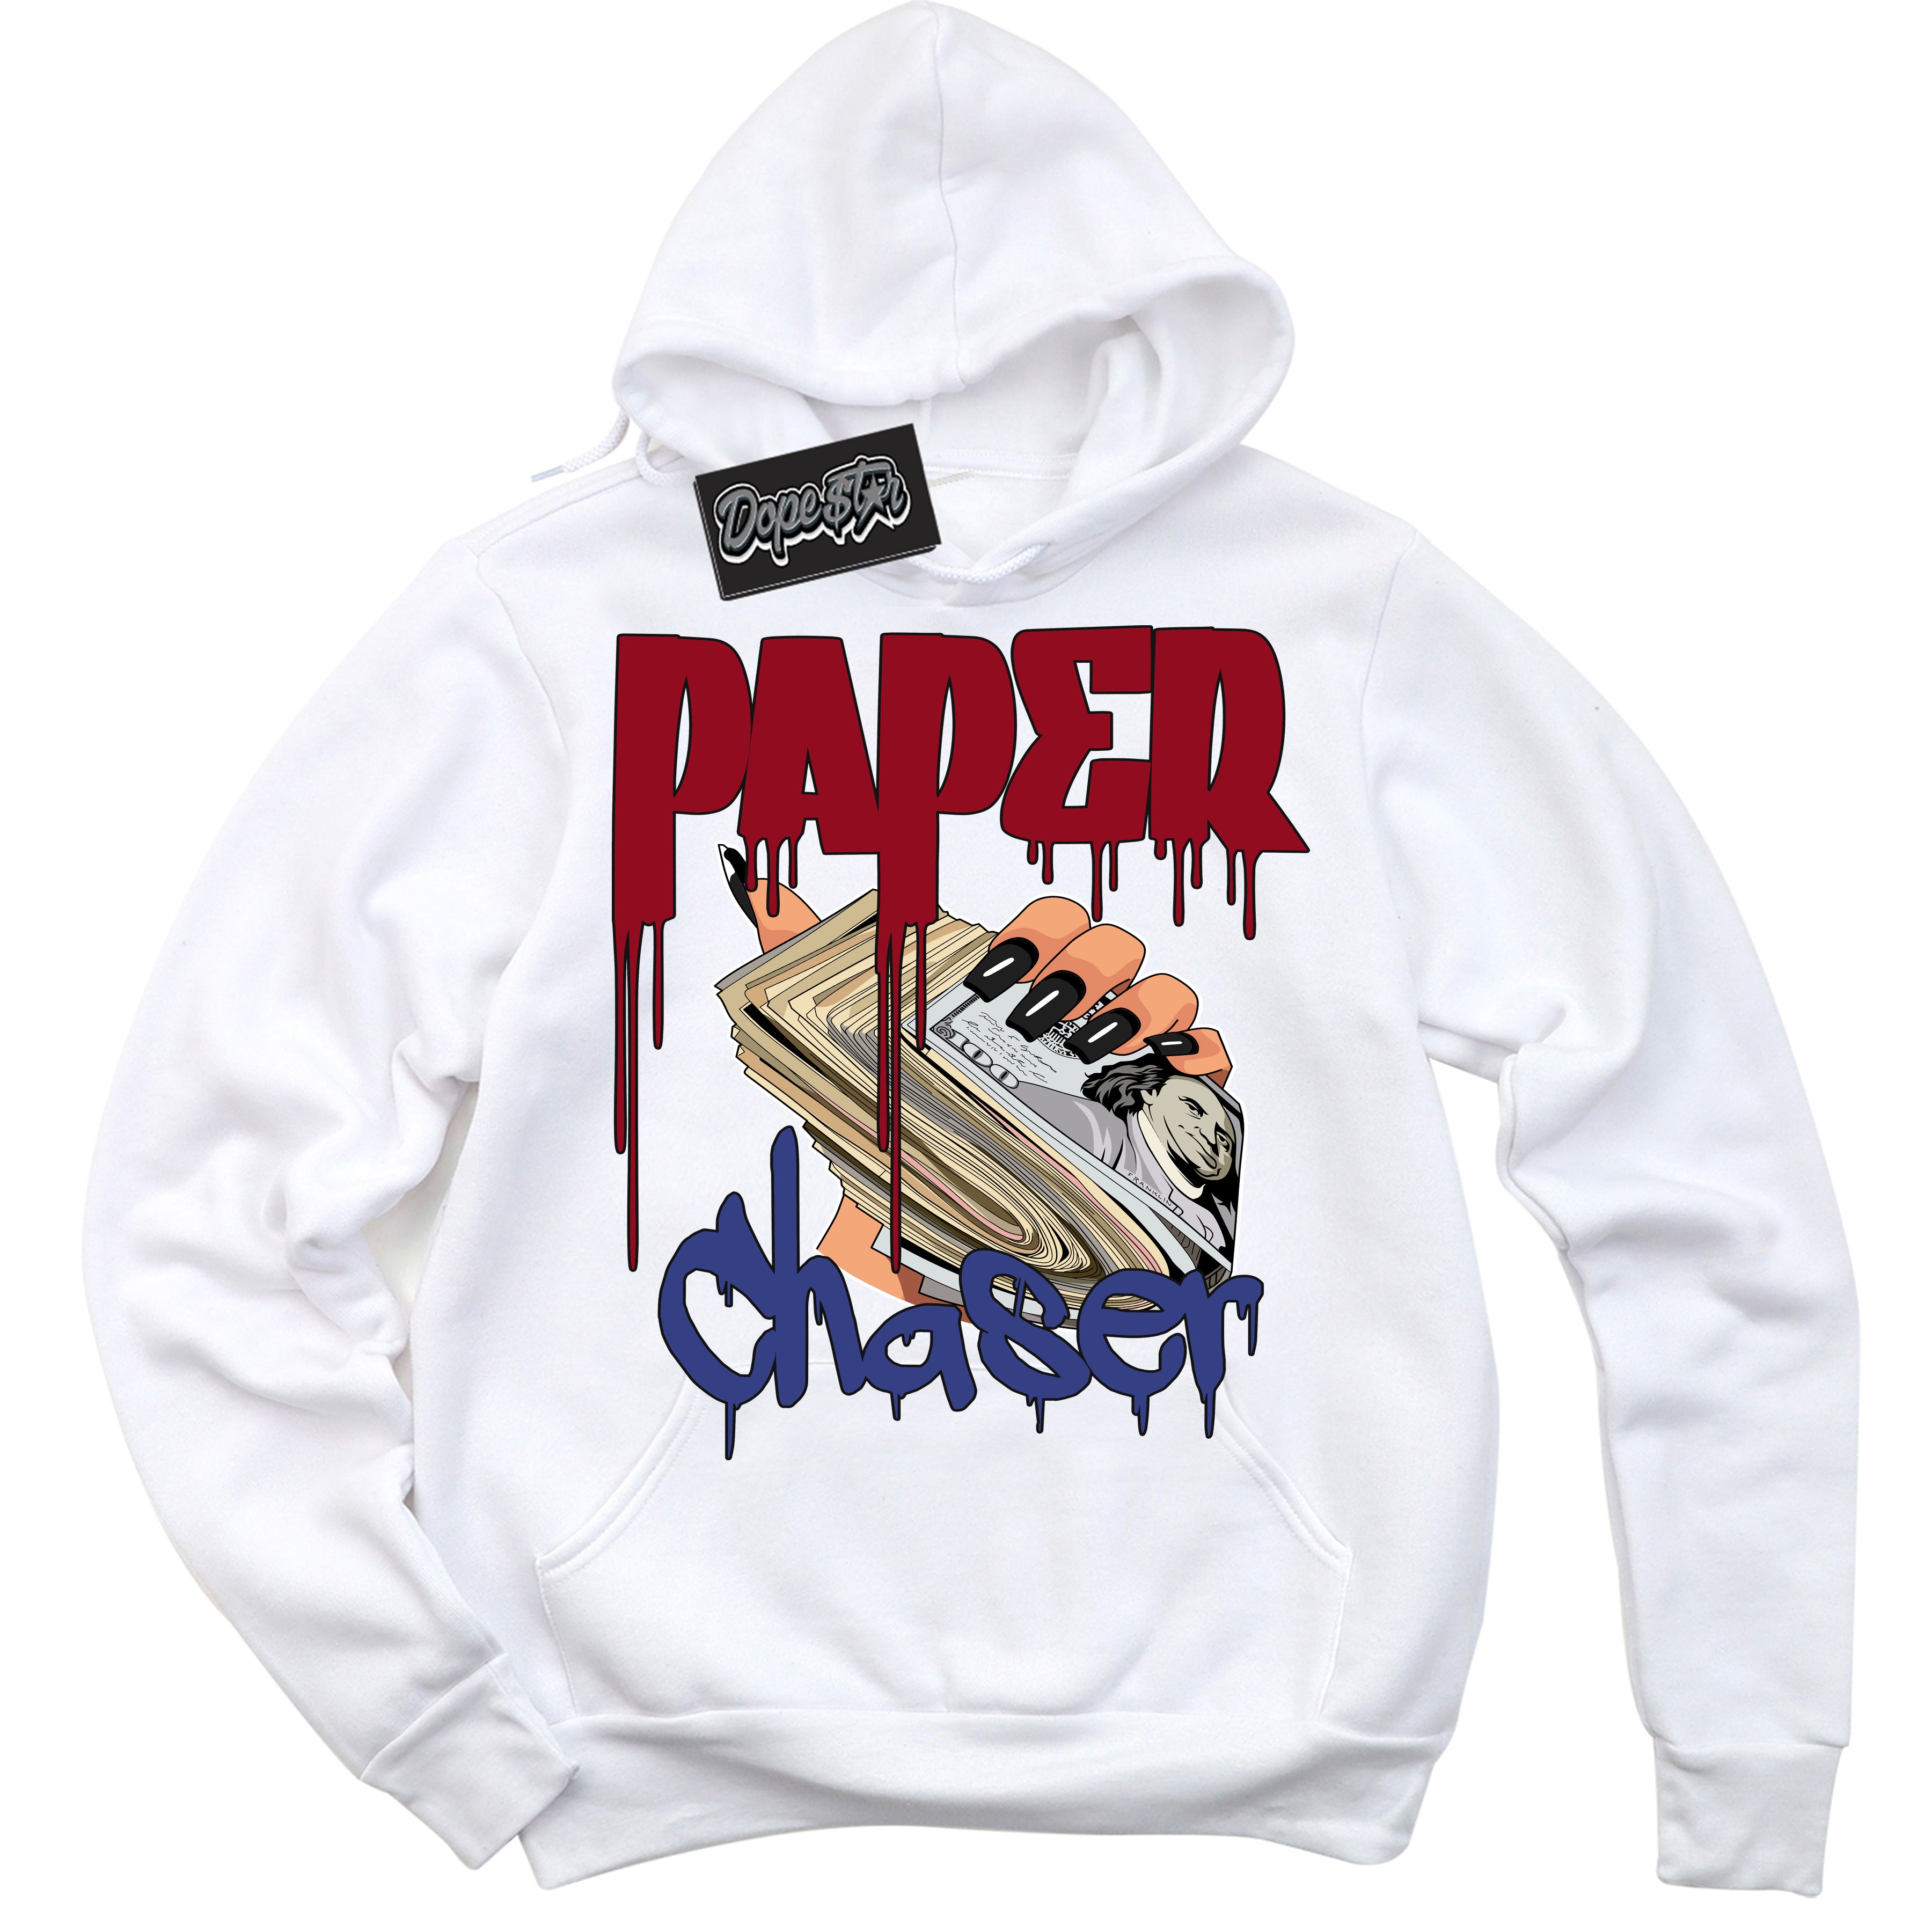 Cool White Hoodie with “ Paper Chaser ”  design that Perfectly Matches Playoffs 8s Sneakers.